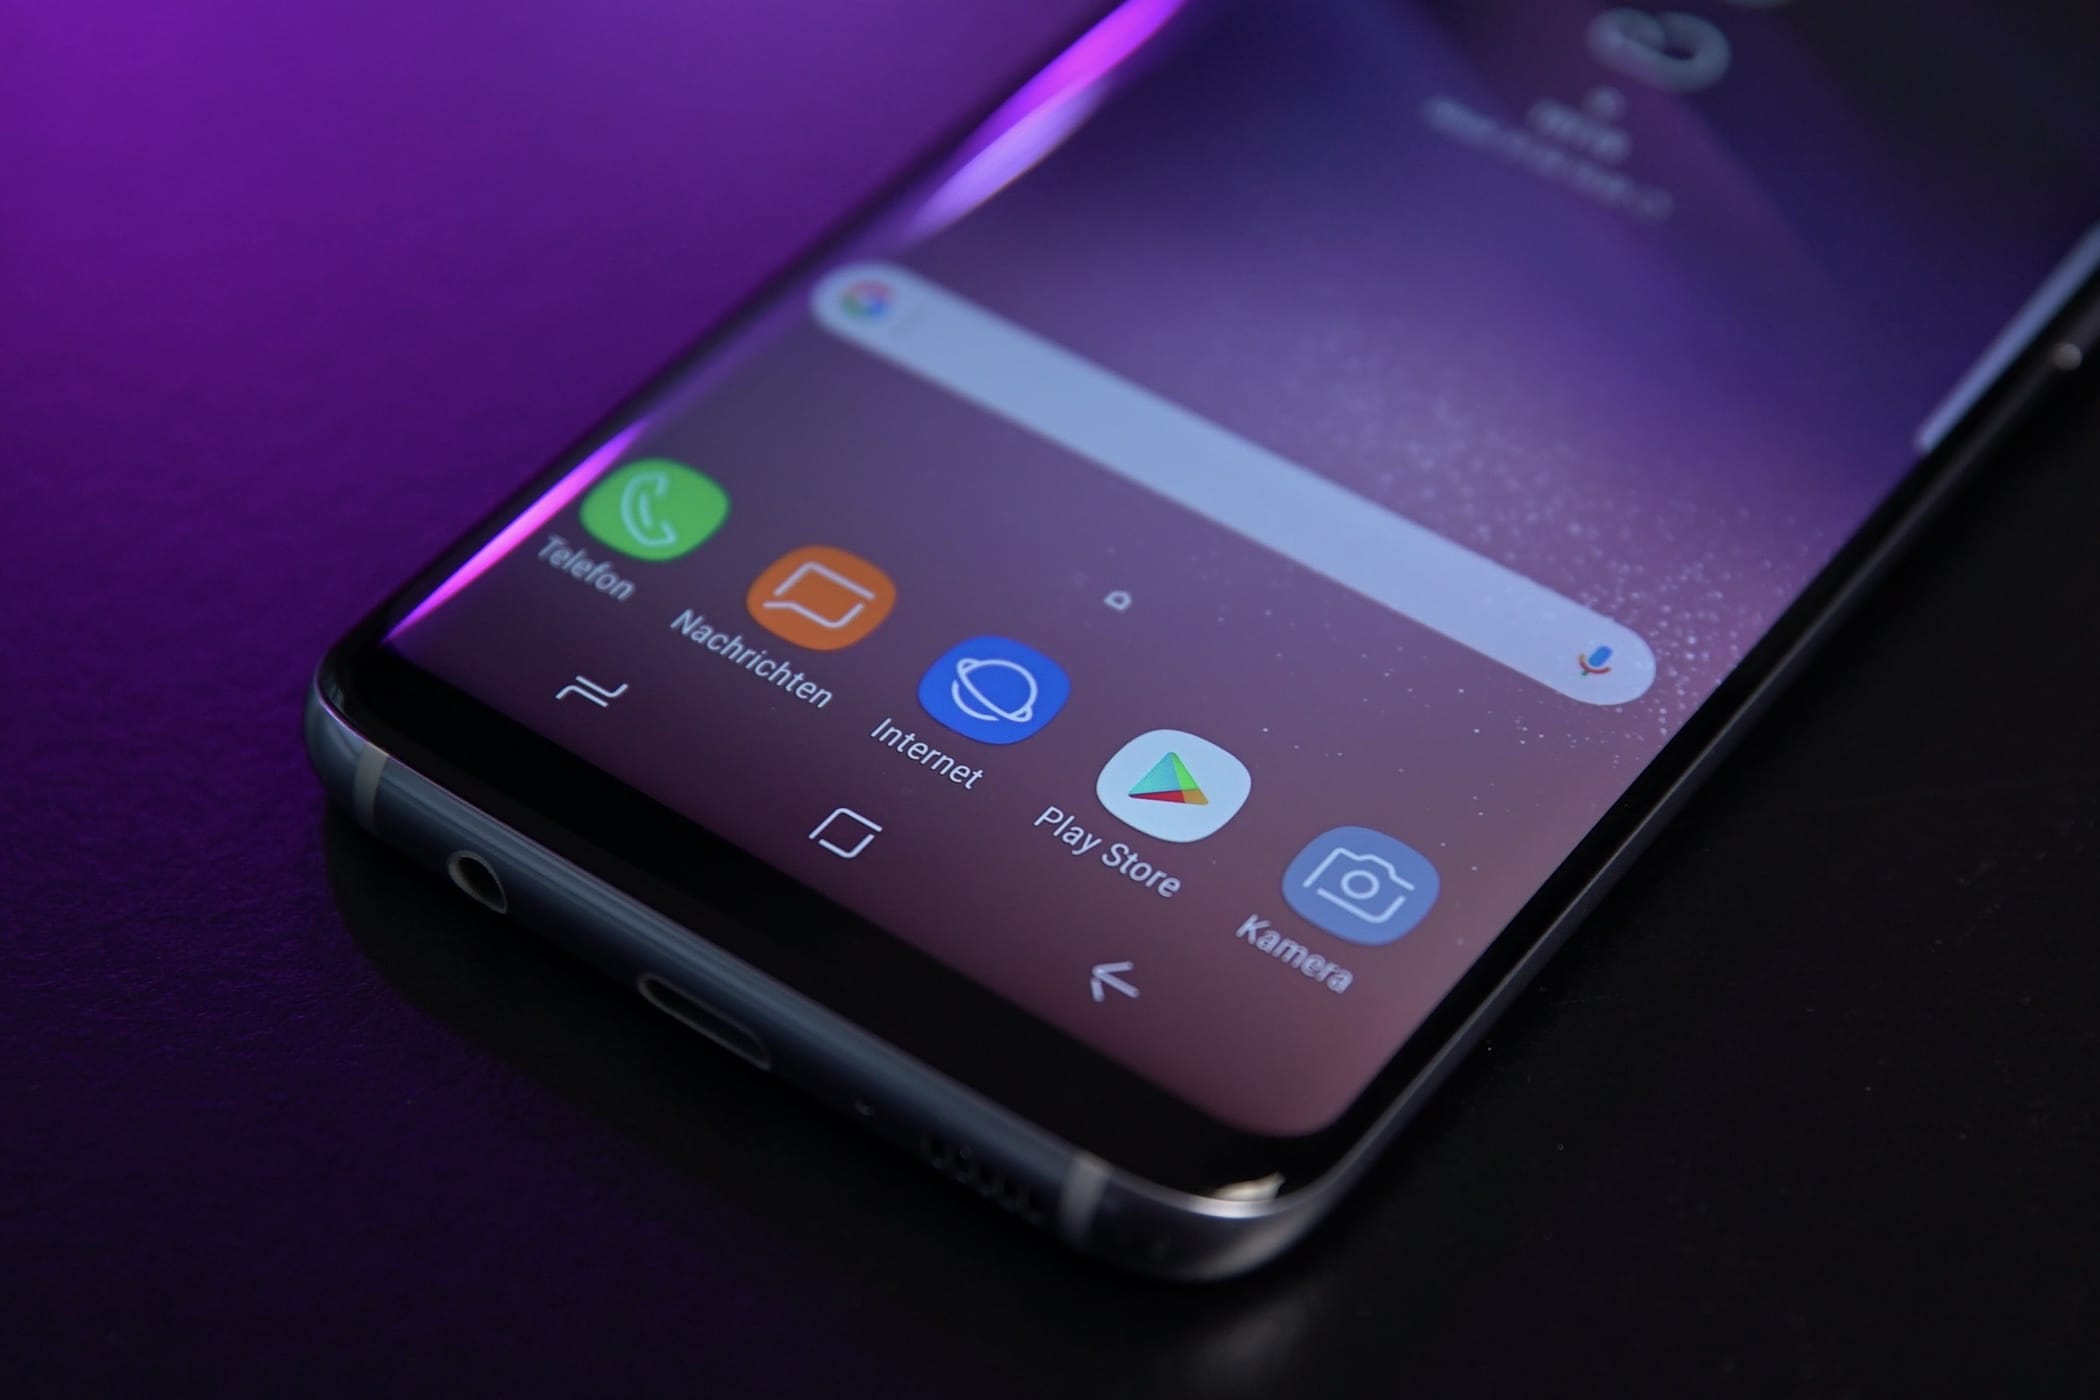 Samsung has released a separate application to boast features Galaxy S9